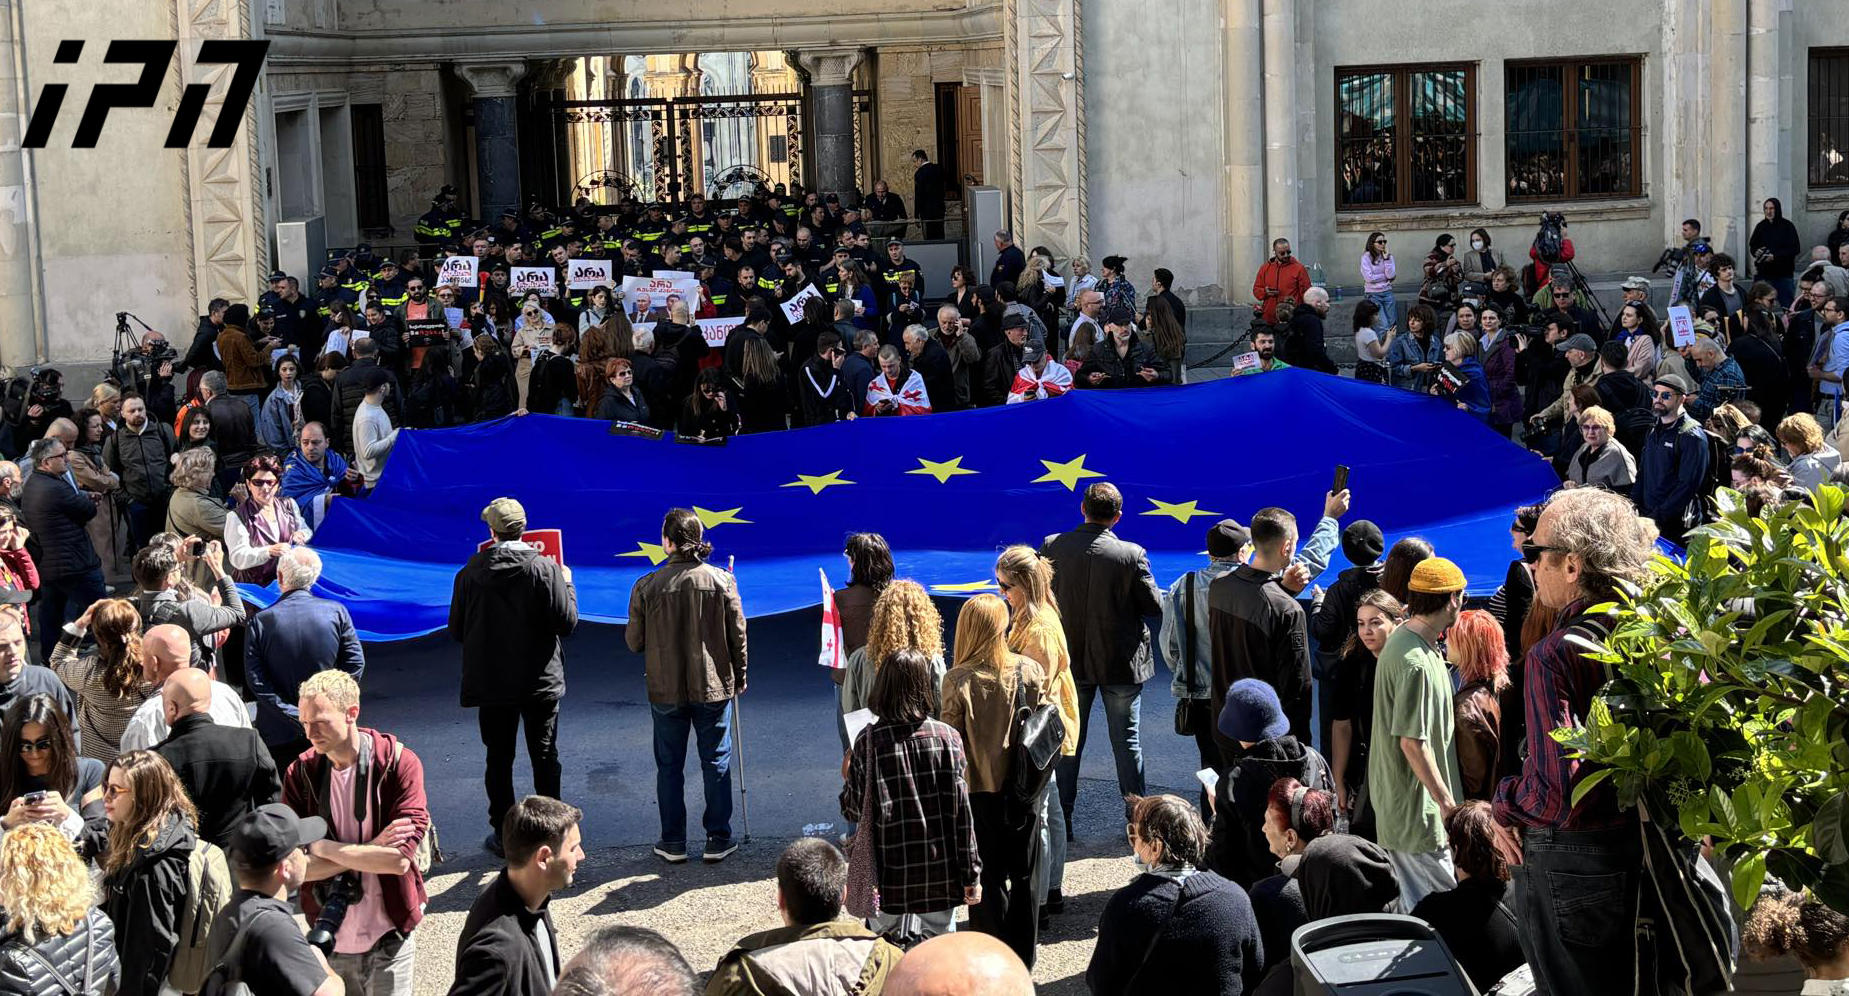 The European Union flag was unfurled at the demonstration at the back ...